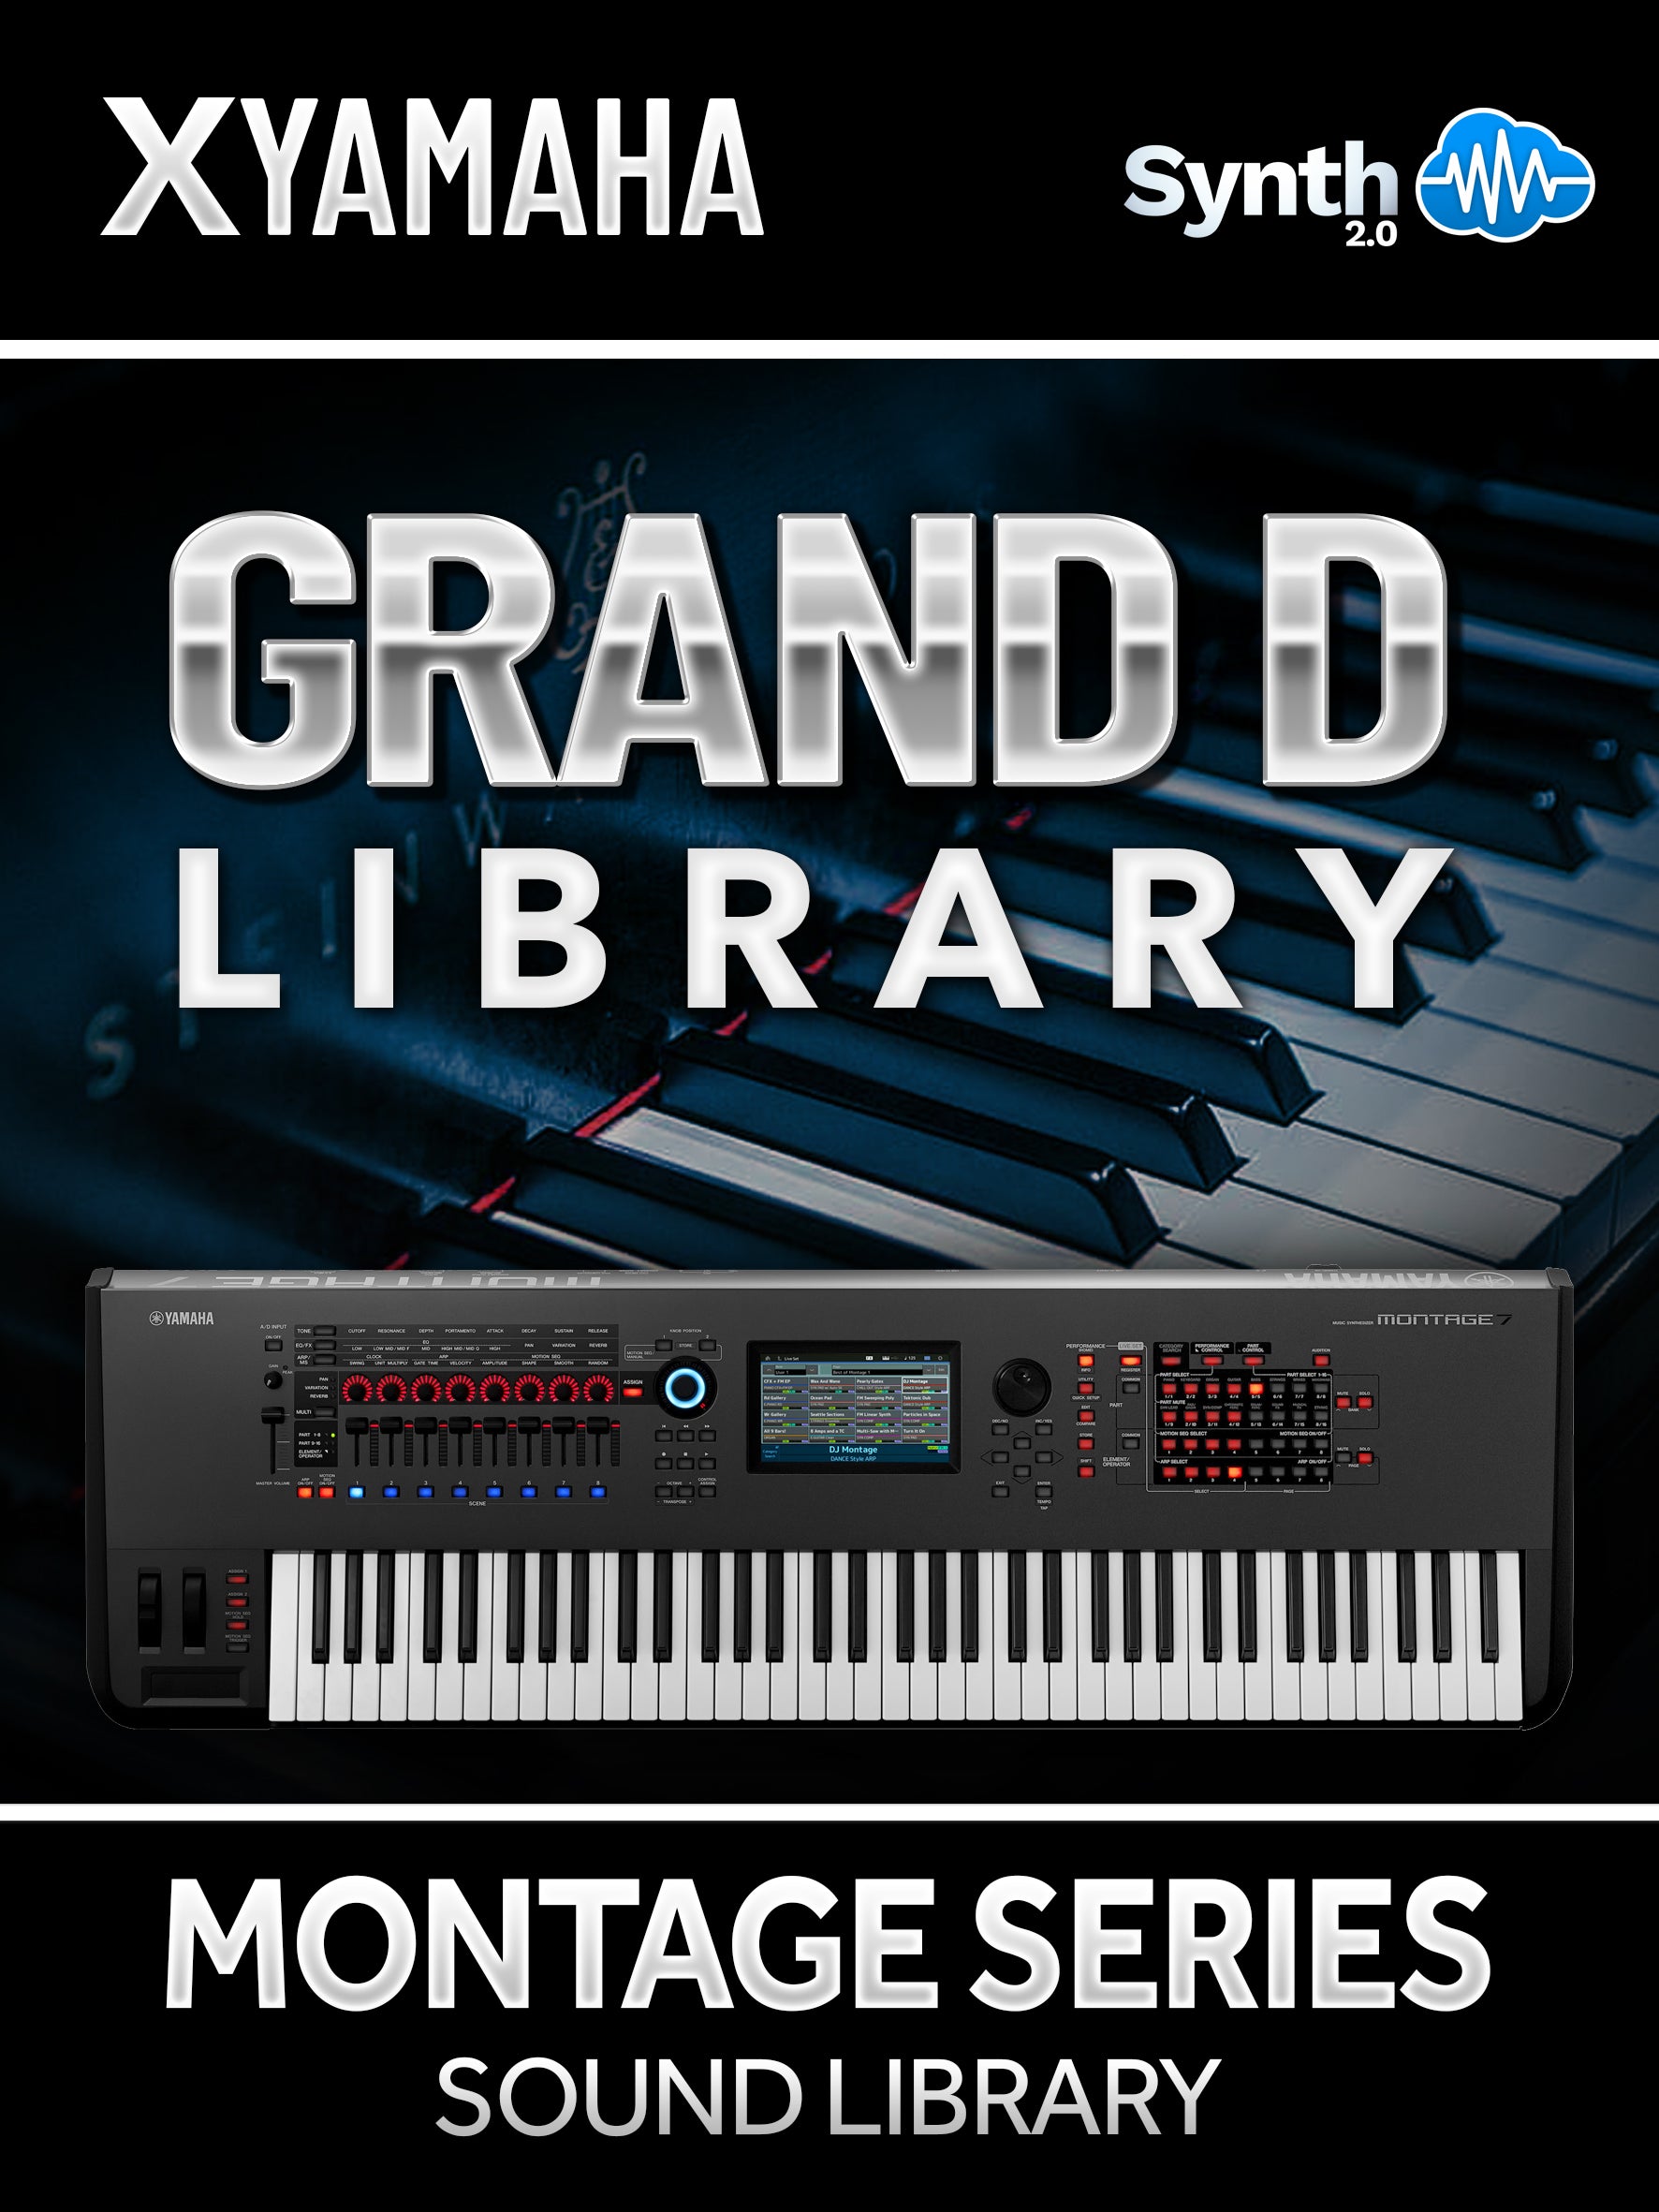 ITB009 - Grand D Library - Yamaha MONTAGE / M ( 4 presets )